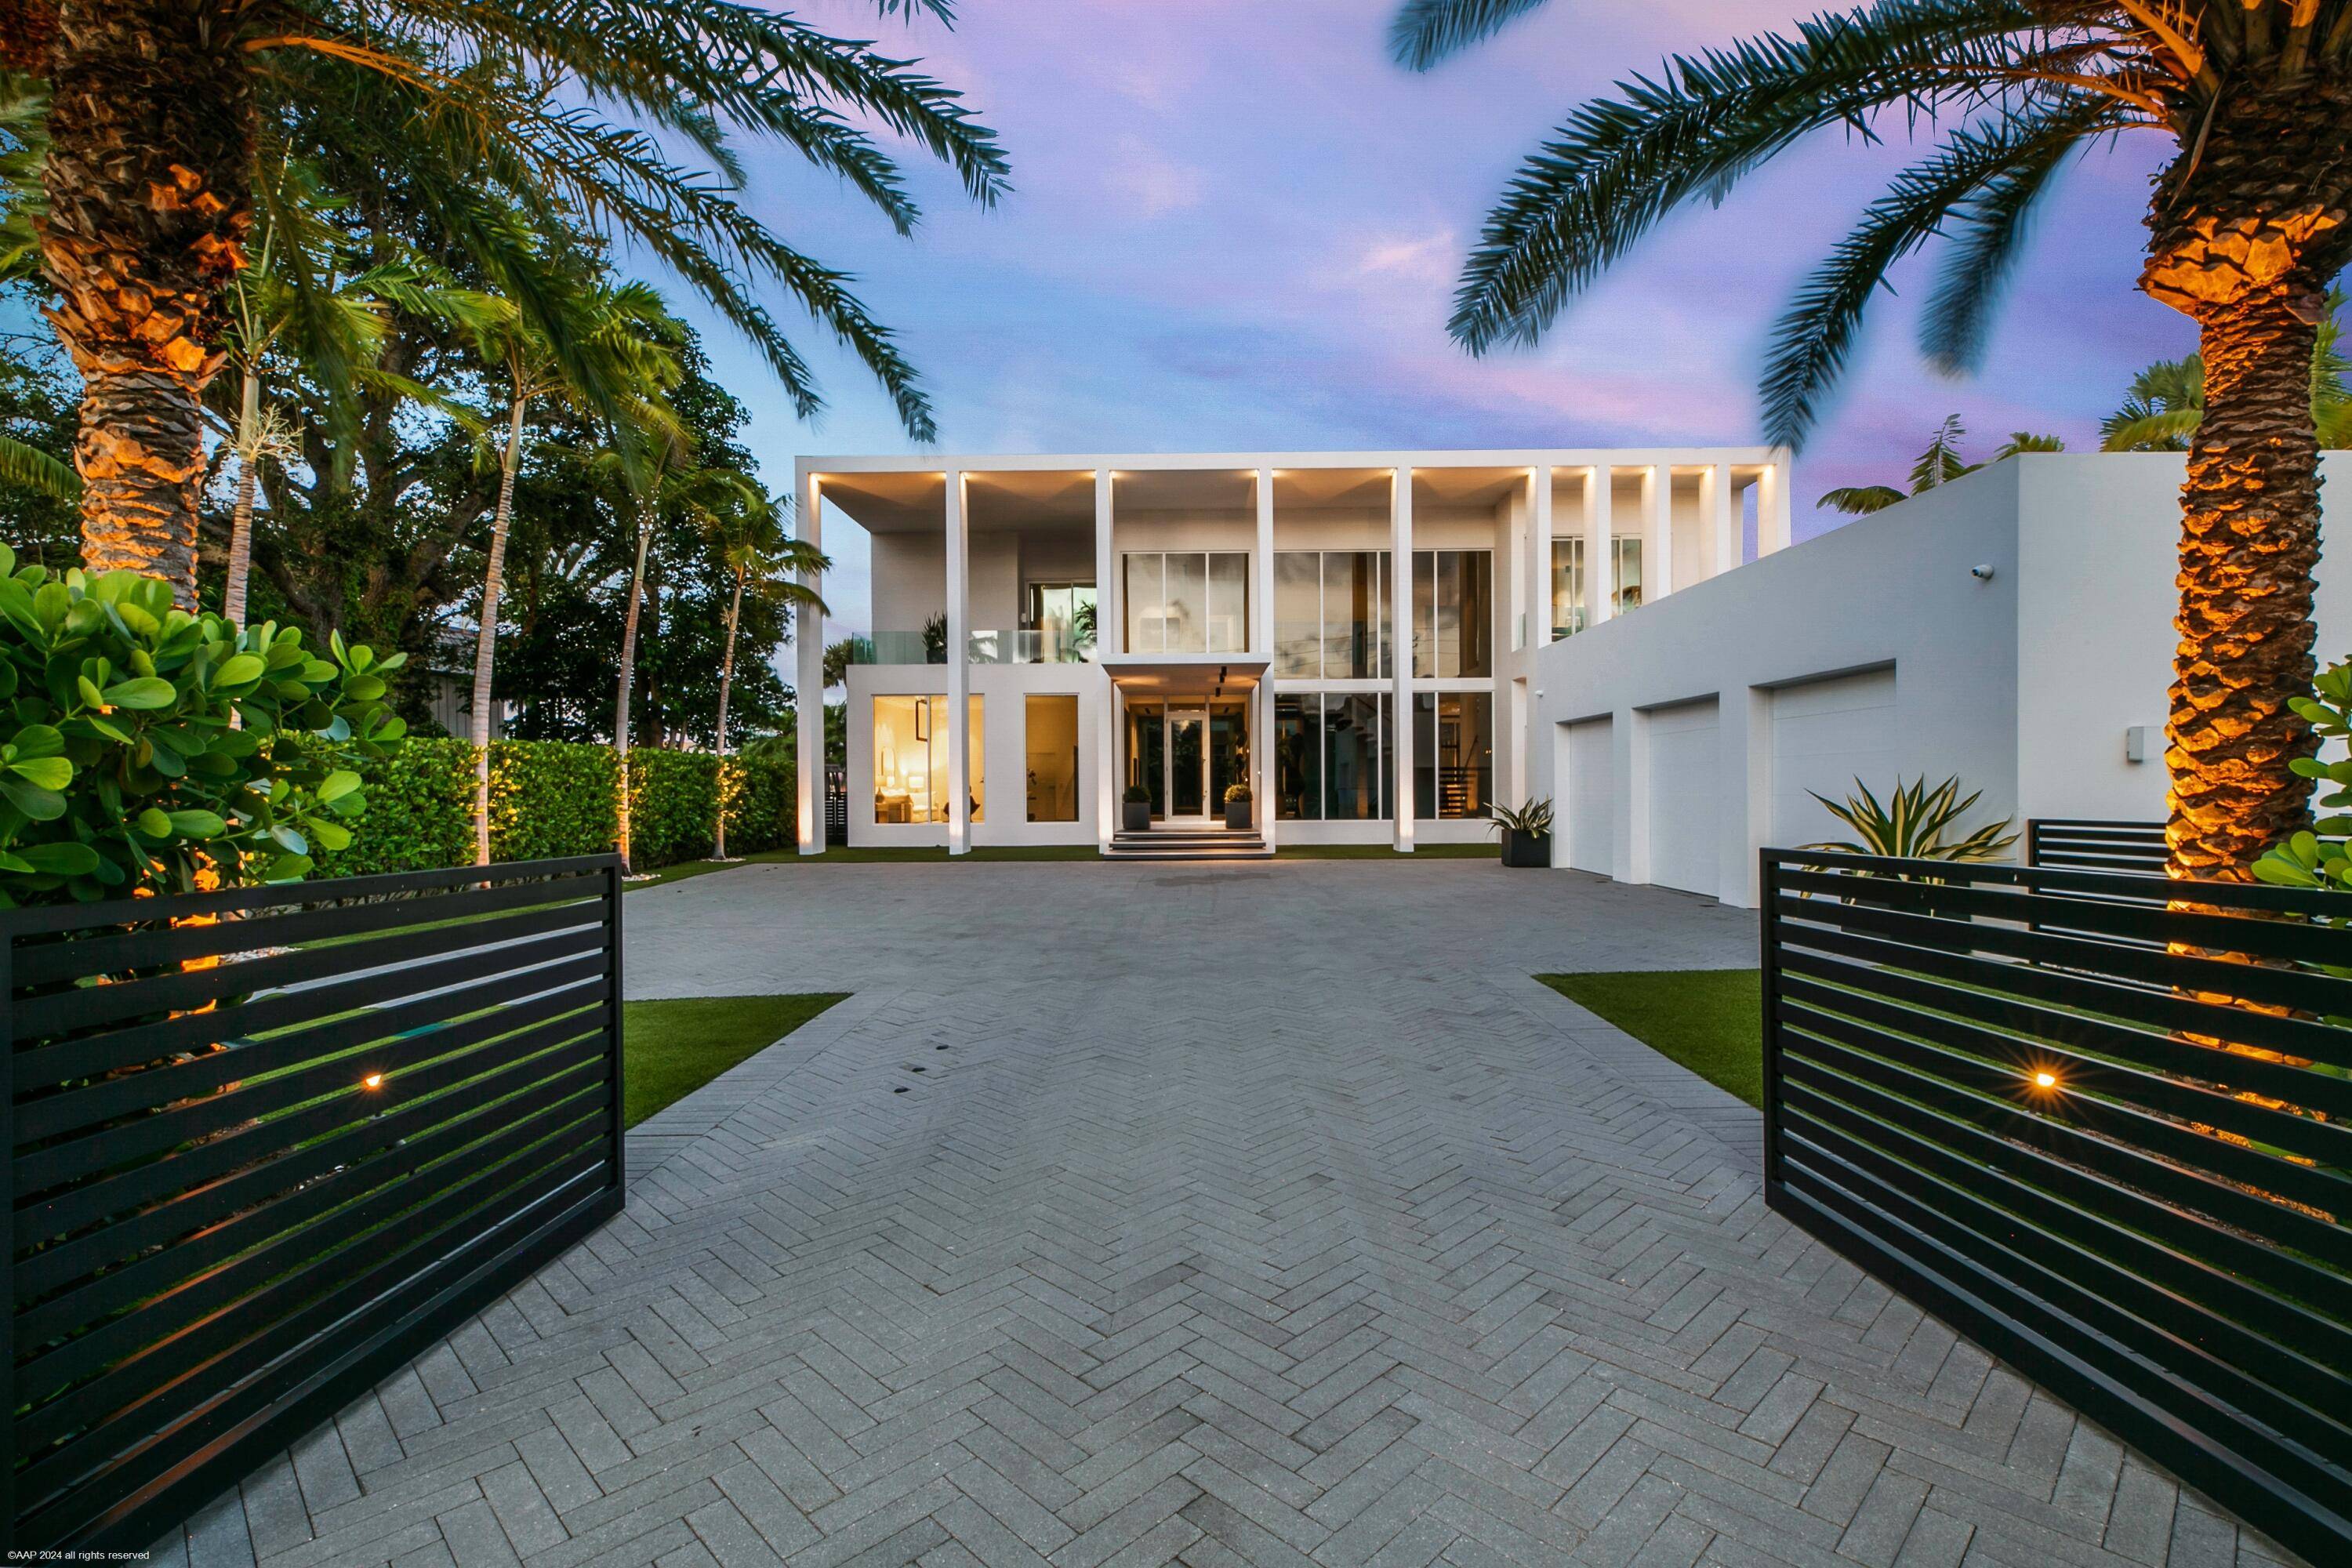 Nestled in prestigious Palm Beach Gardens, this stunning single family home epitomizes luxury living with its gorgeous water views and ultra modern design.